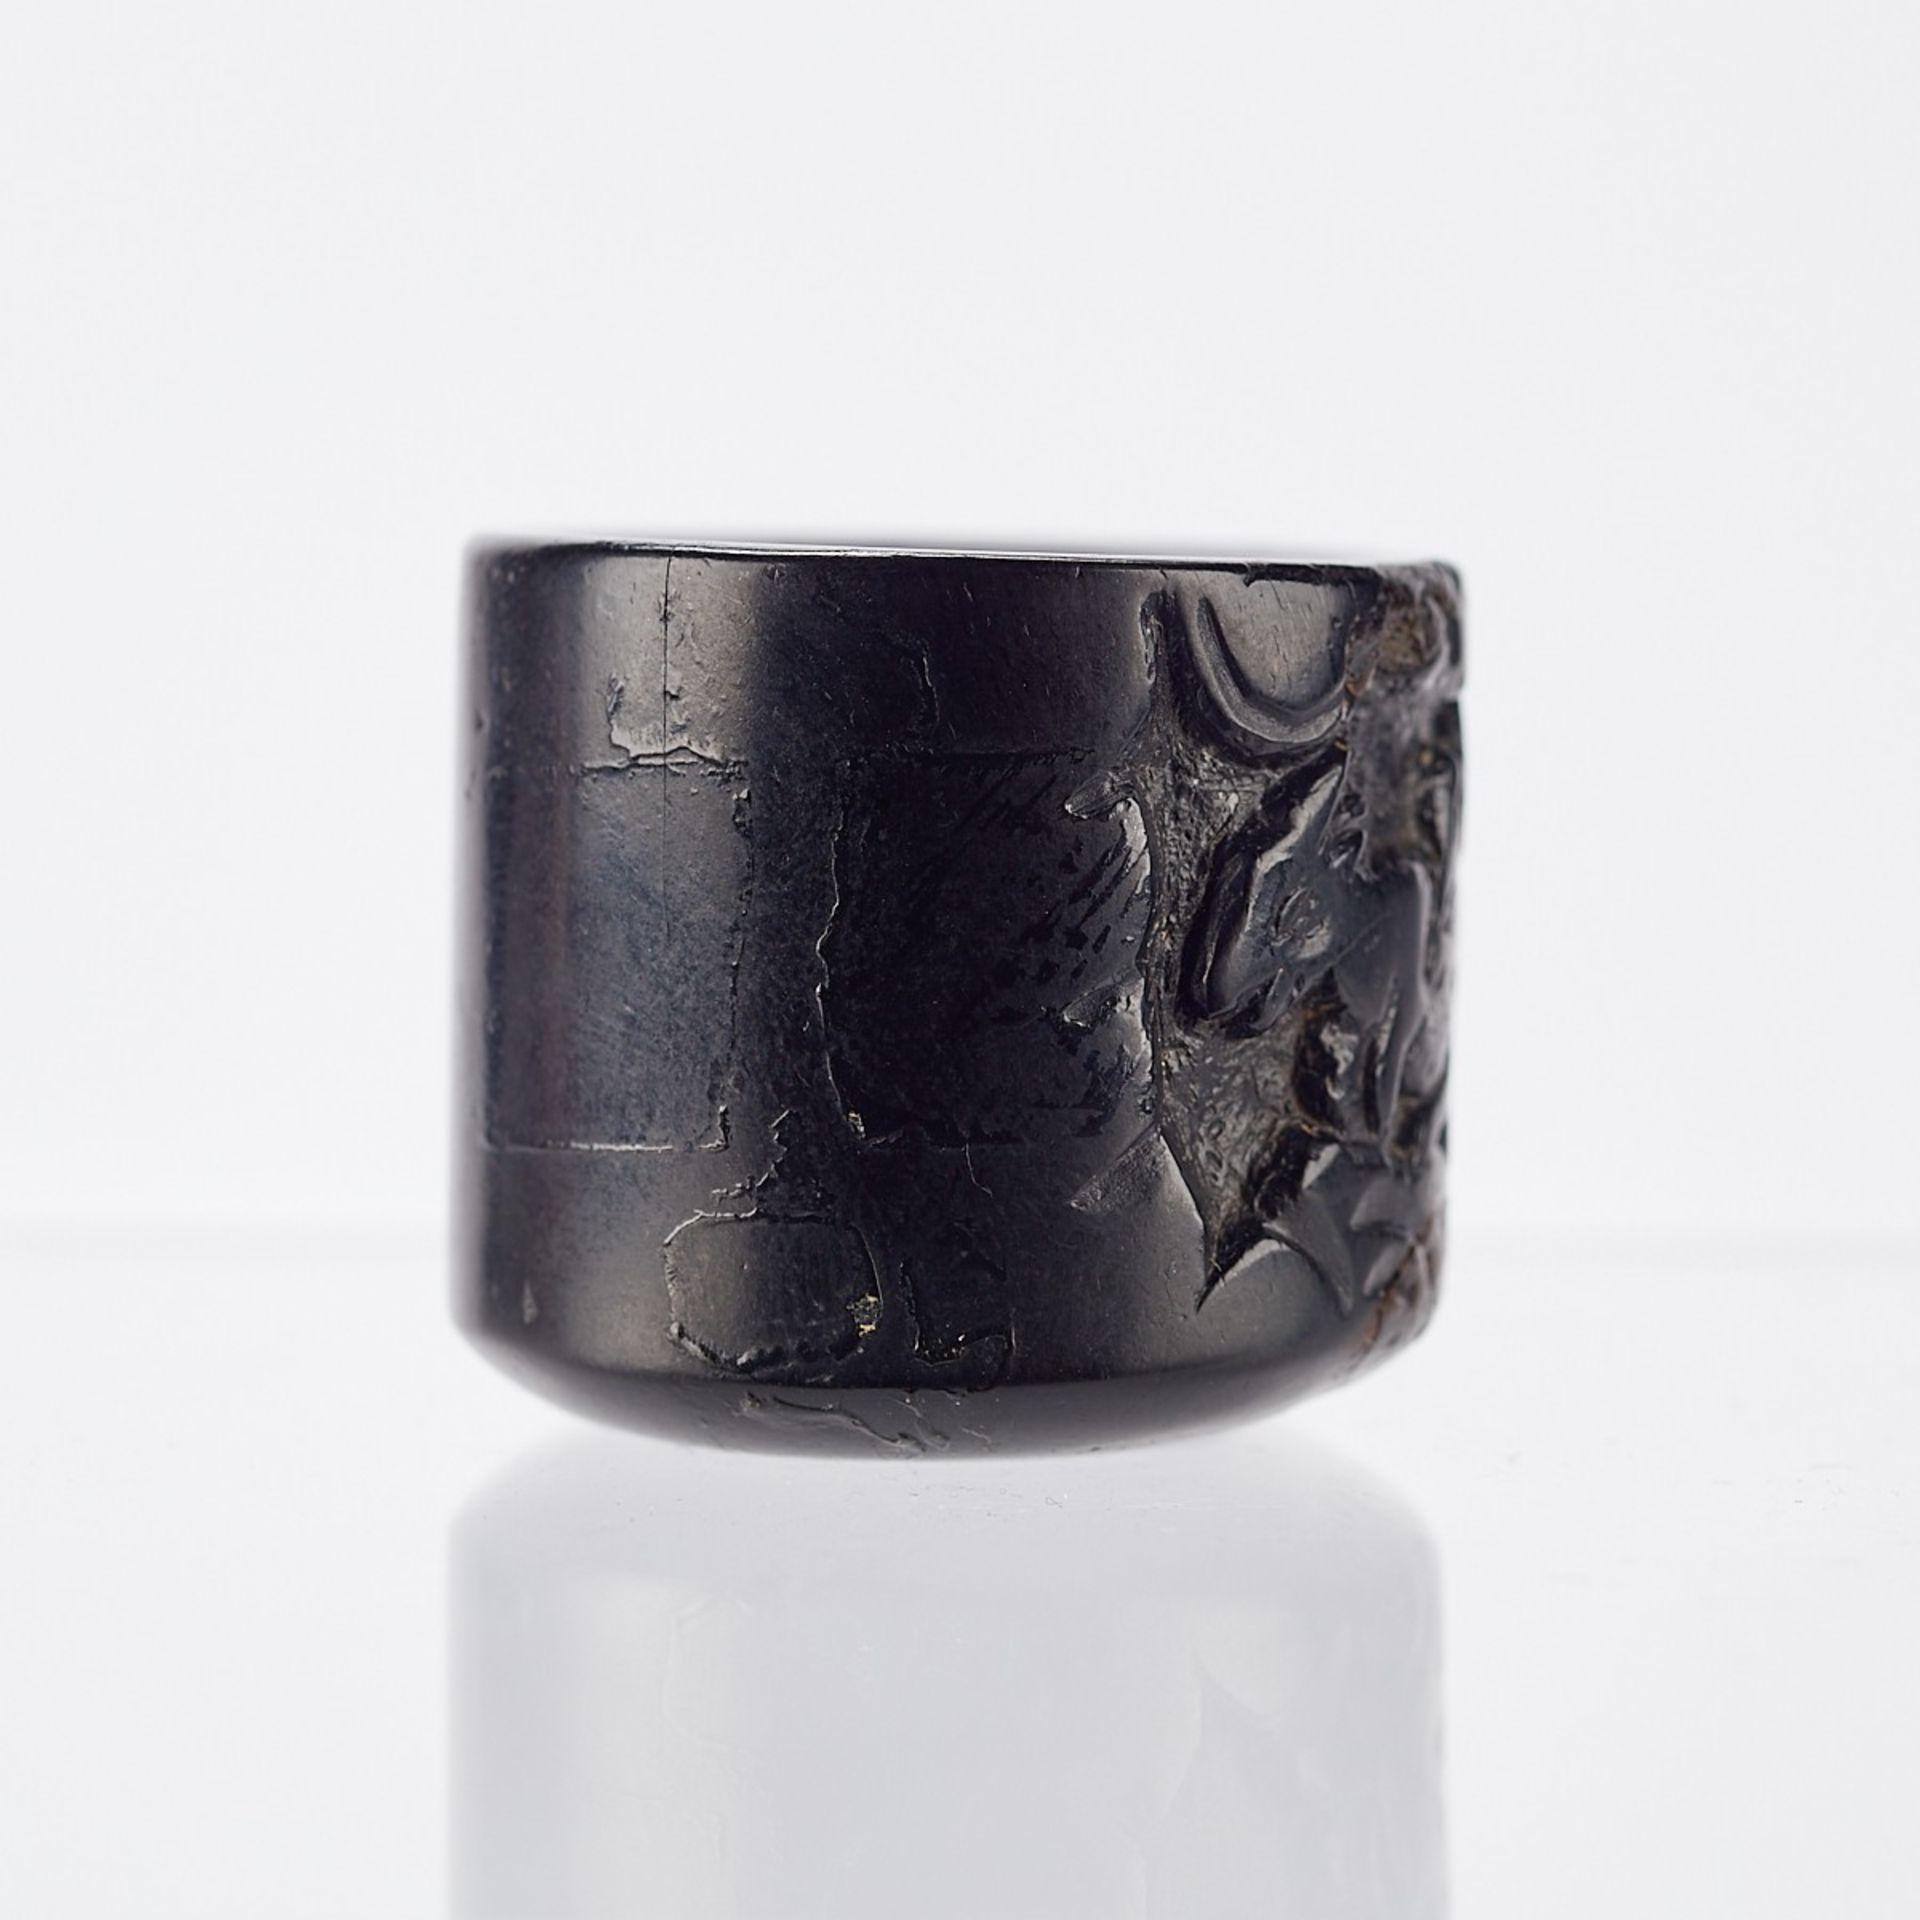 Chinese Carved Wood Archery Ring w/ Rams - Image 4 of 6